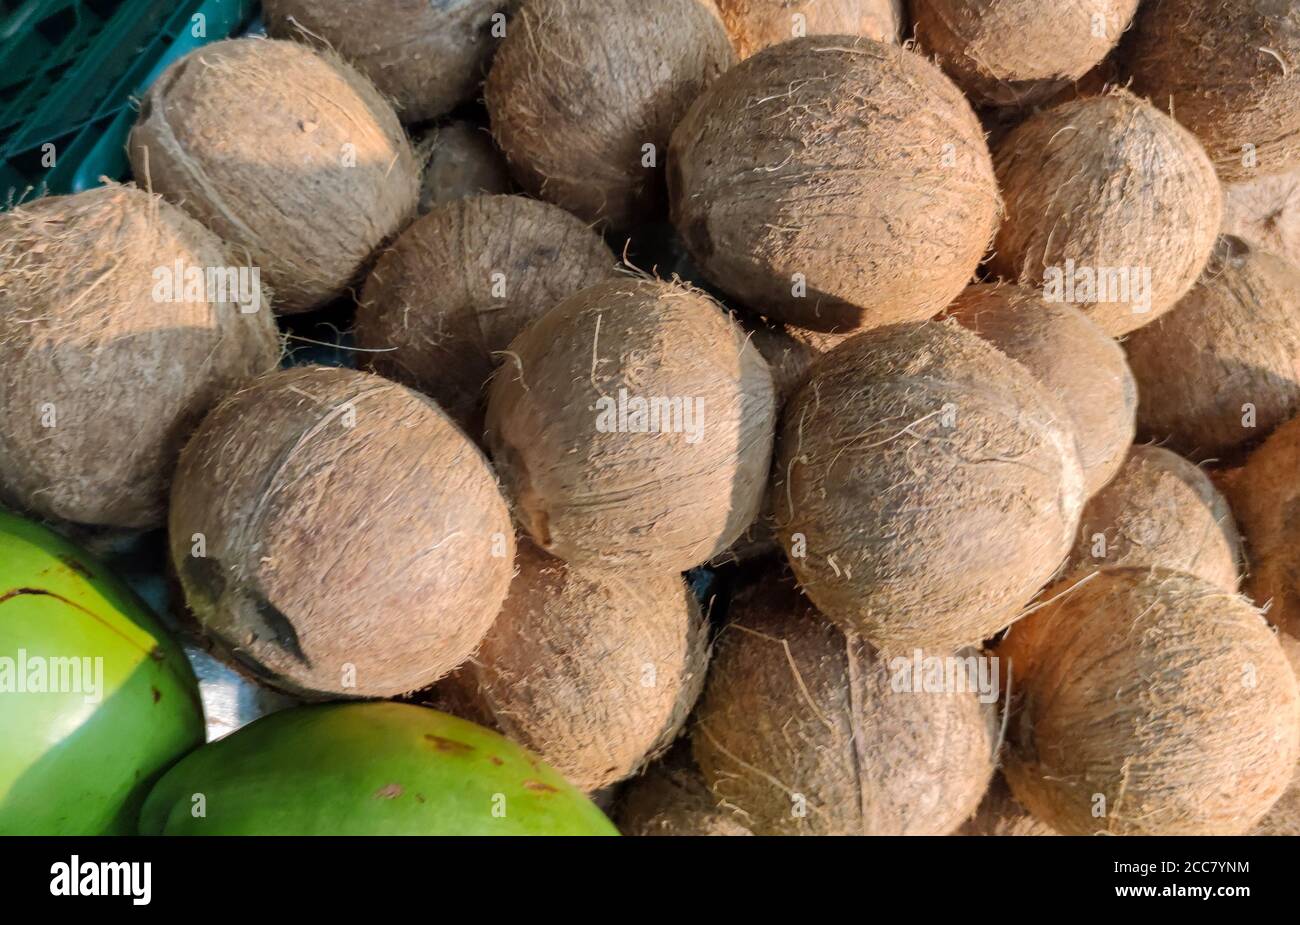 Fresh coconut fruits. The coconut tree (Cocos nucifera), is a member of the Arecaceae family. Coconut trees have spread across the tropics, in particu Stock Photo